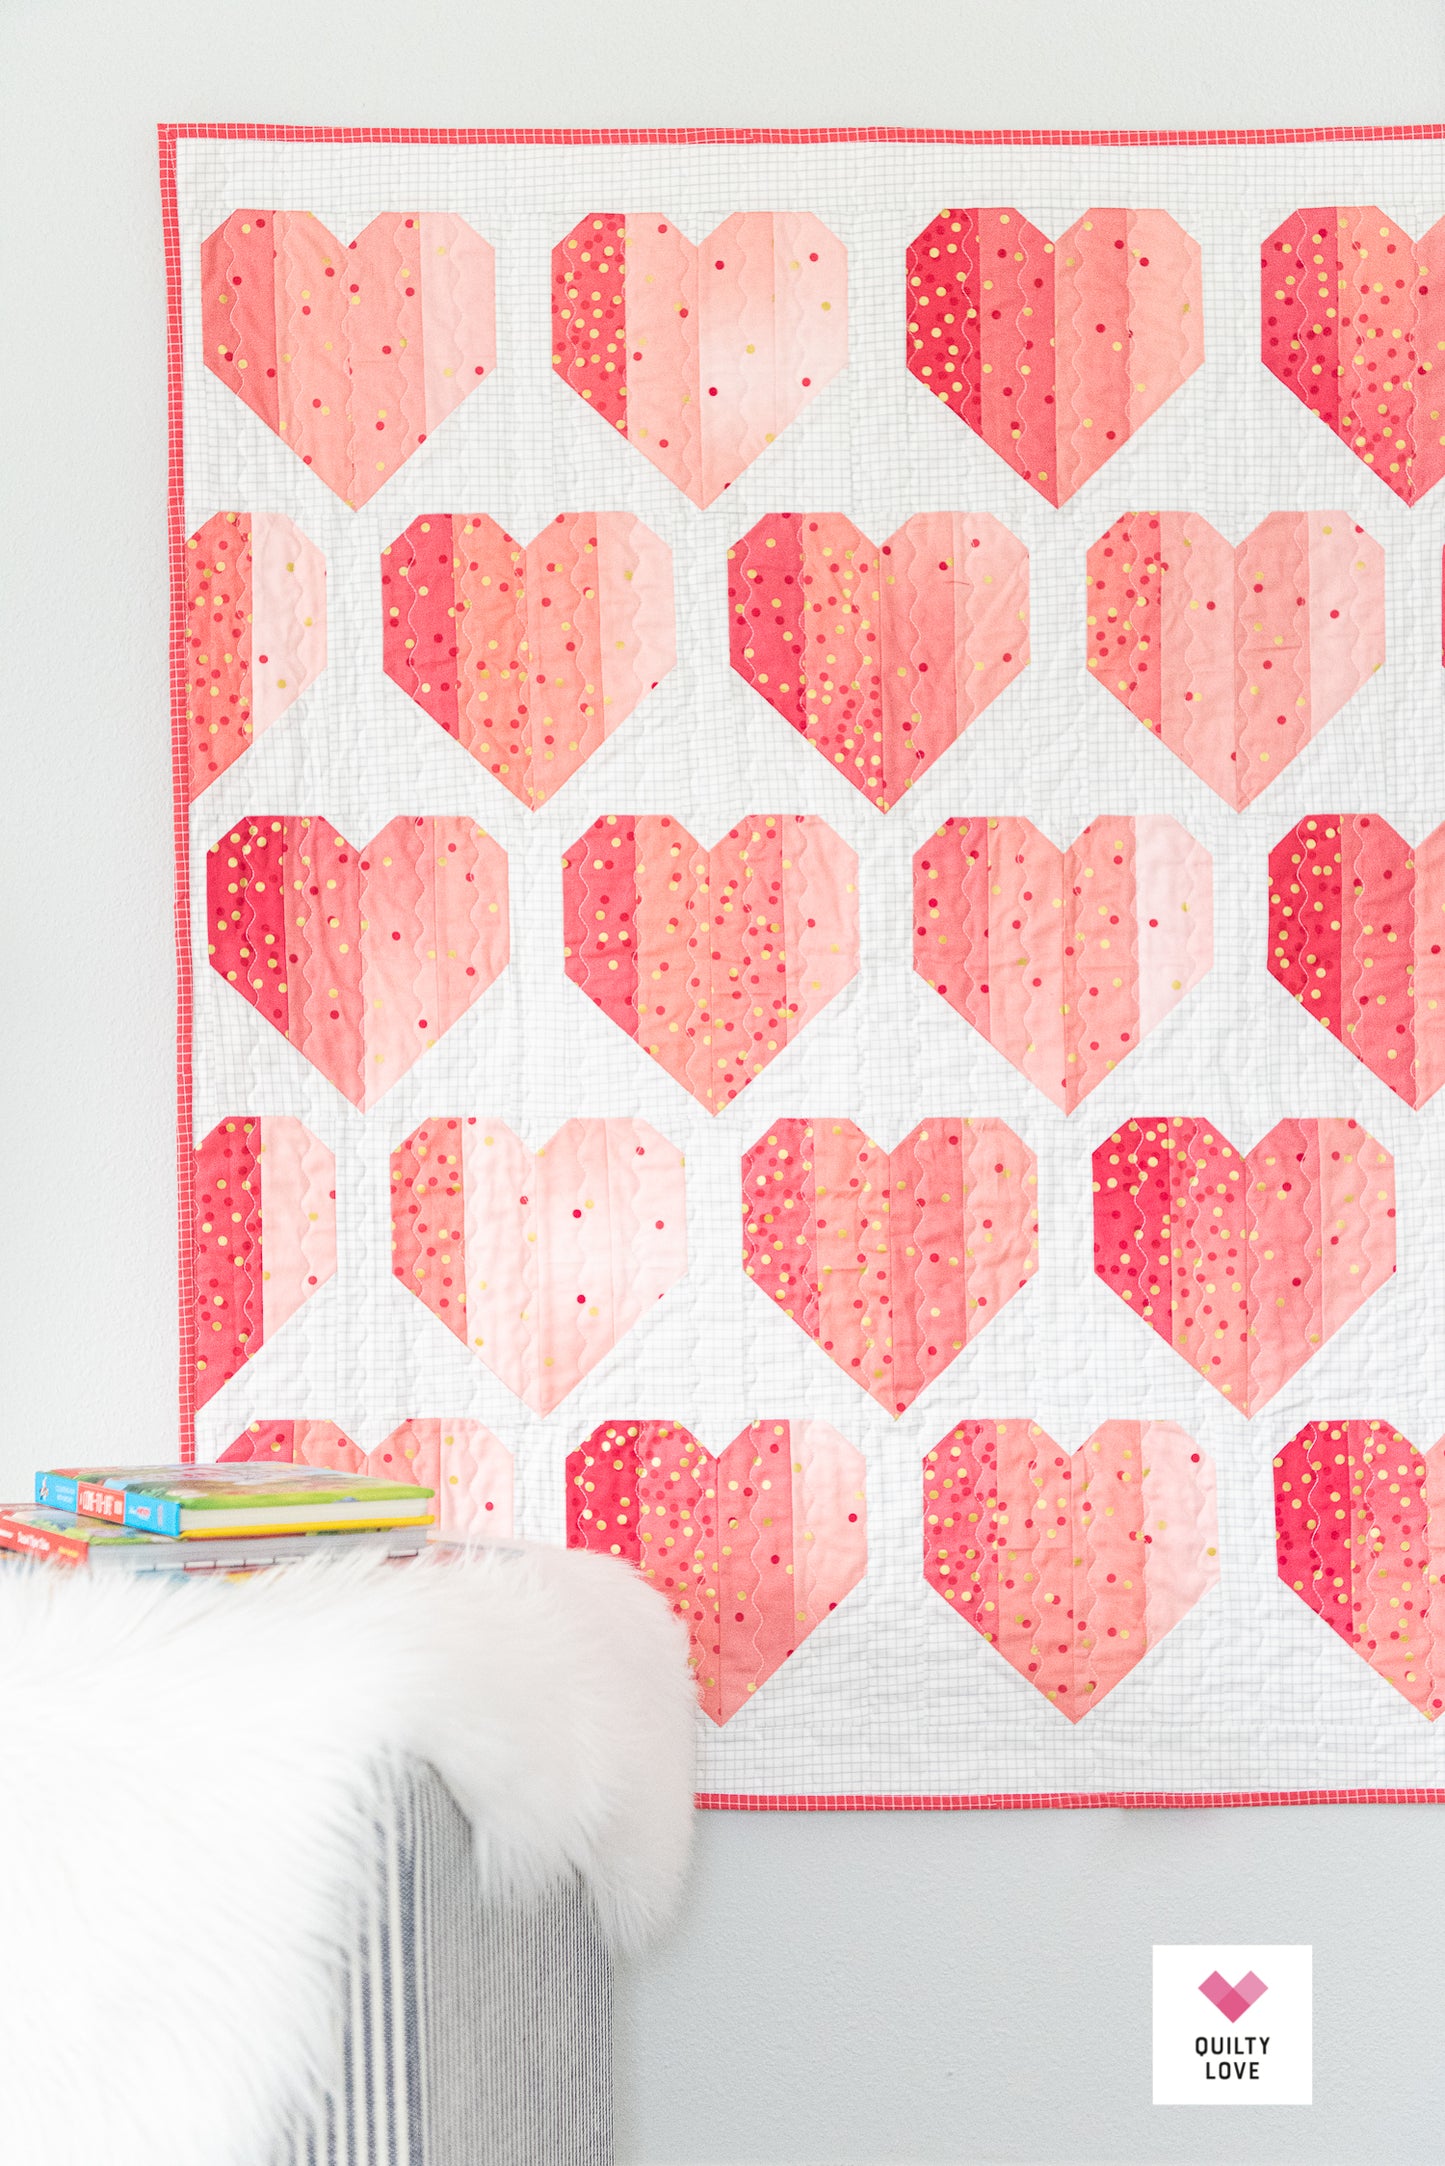 Infinite Hearts Quilt Pattern - Automatic PDF download